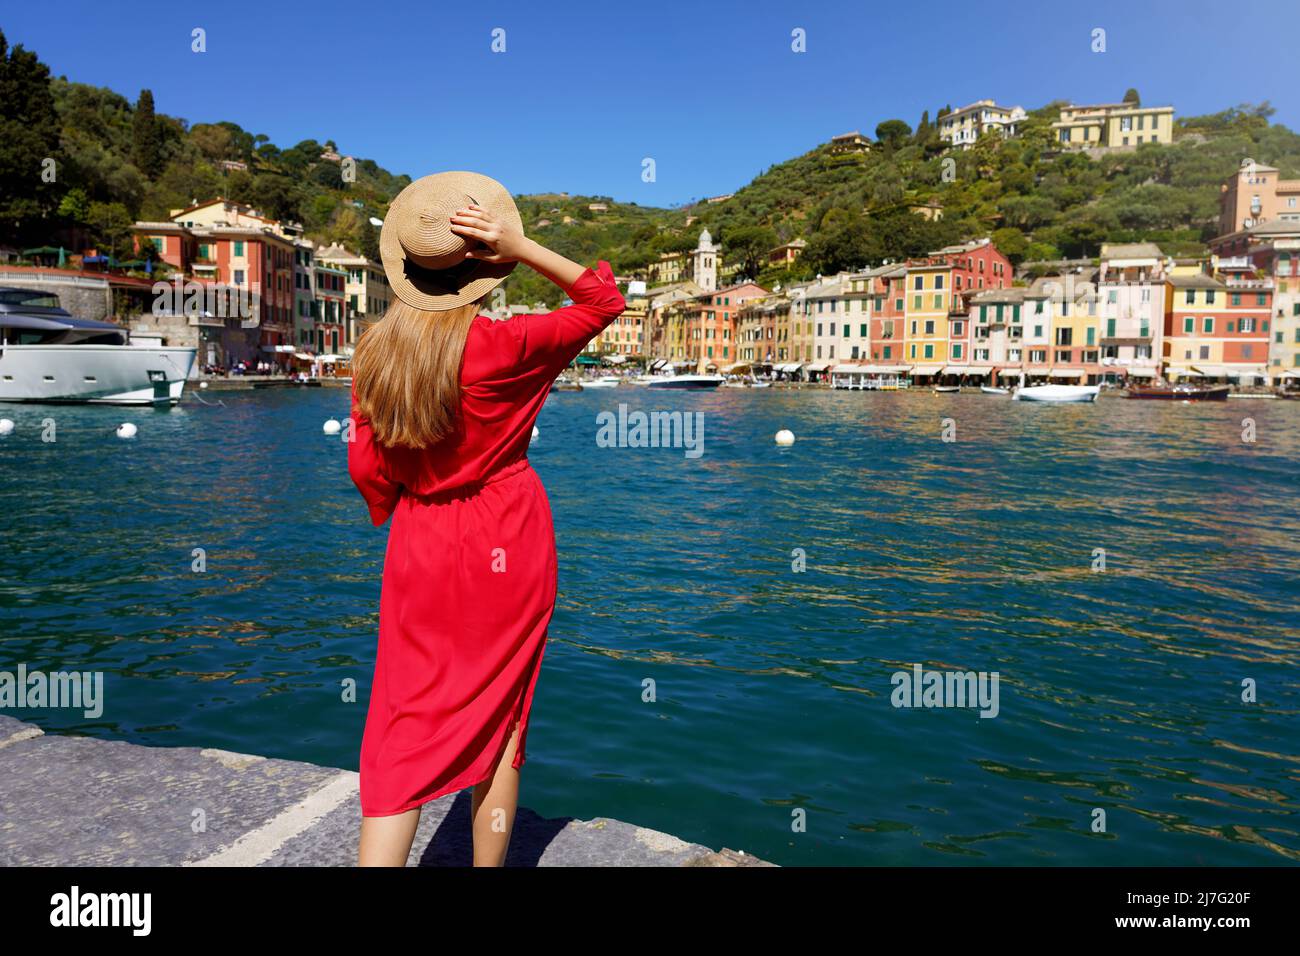 Holidays in Italy. Rear view of beautiful young woman in red dress looks towards Portofino traditional colorful village with yachts moored in its pict Stock Photo